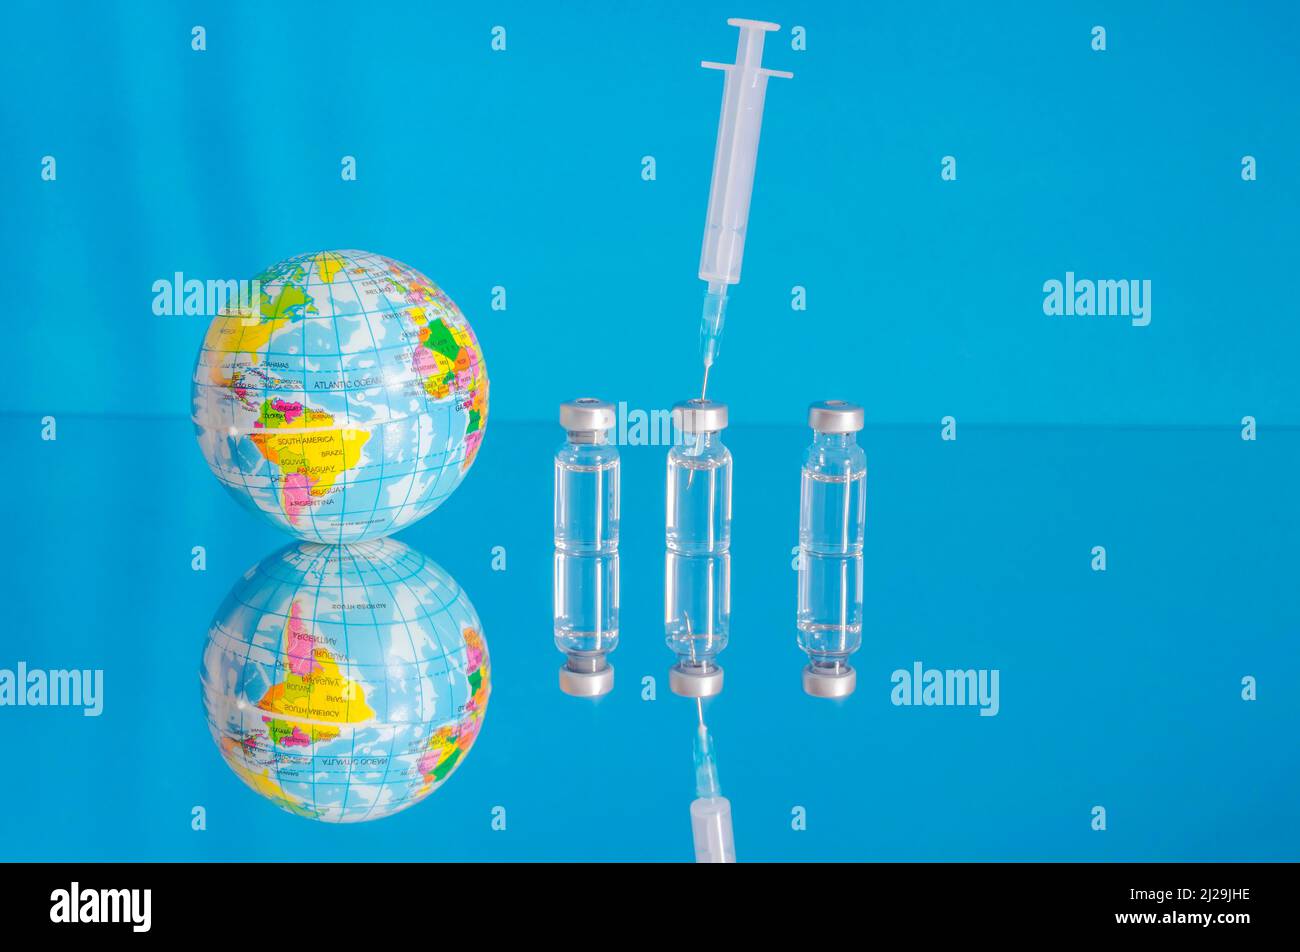 Vaccine bottles and syringe, treatment for COVID-19, influenza or flu, worldwide mass vaccination for coronavirus, global immunization concept with Stock Photo